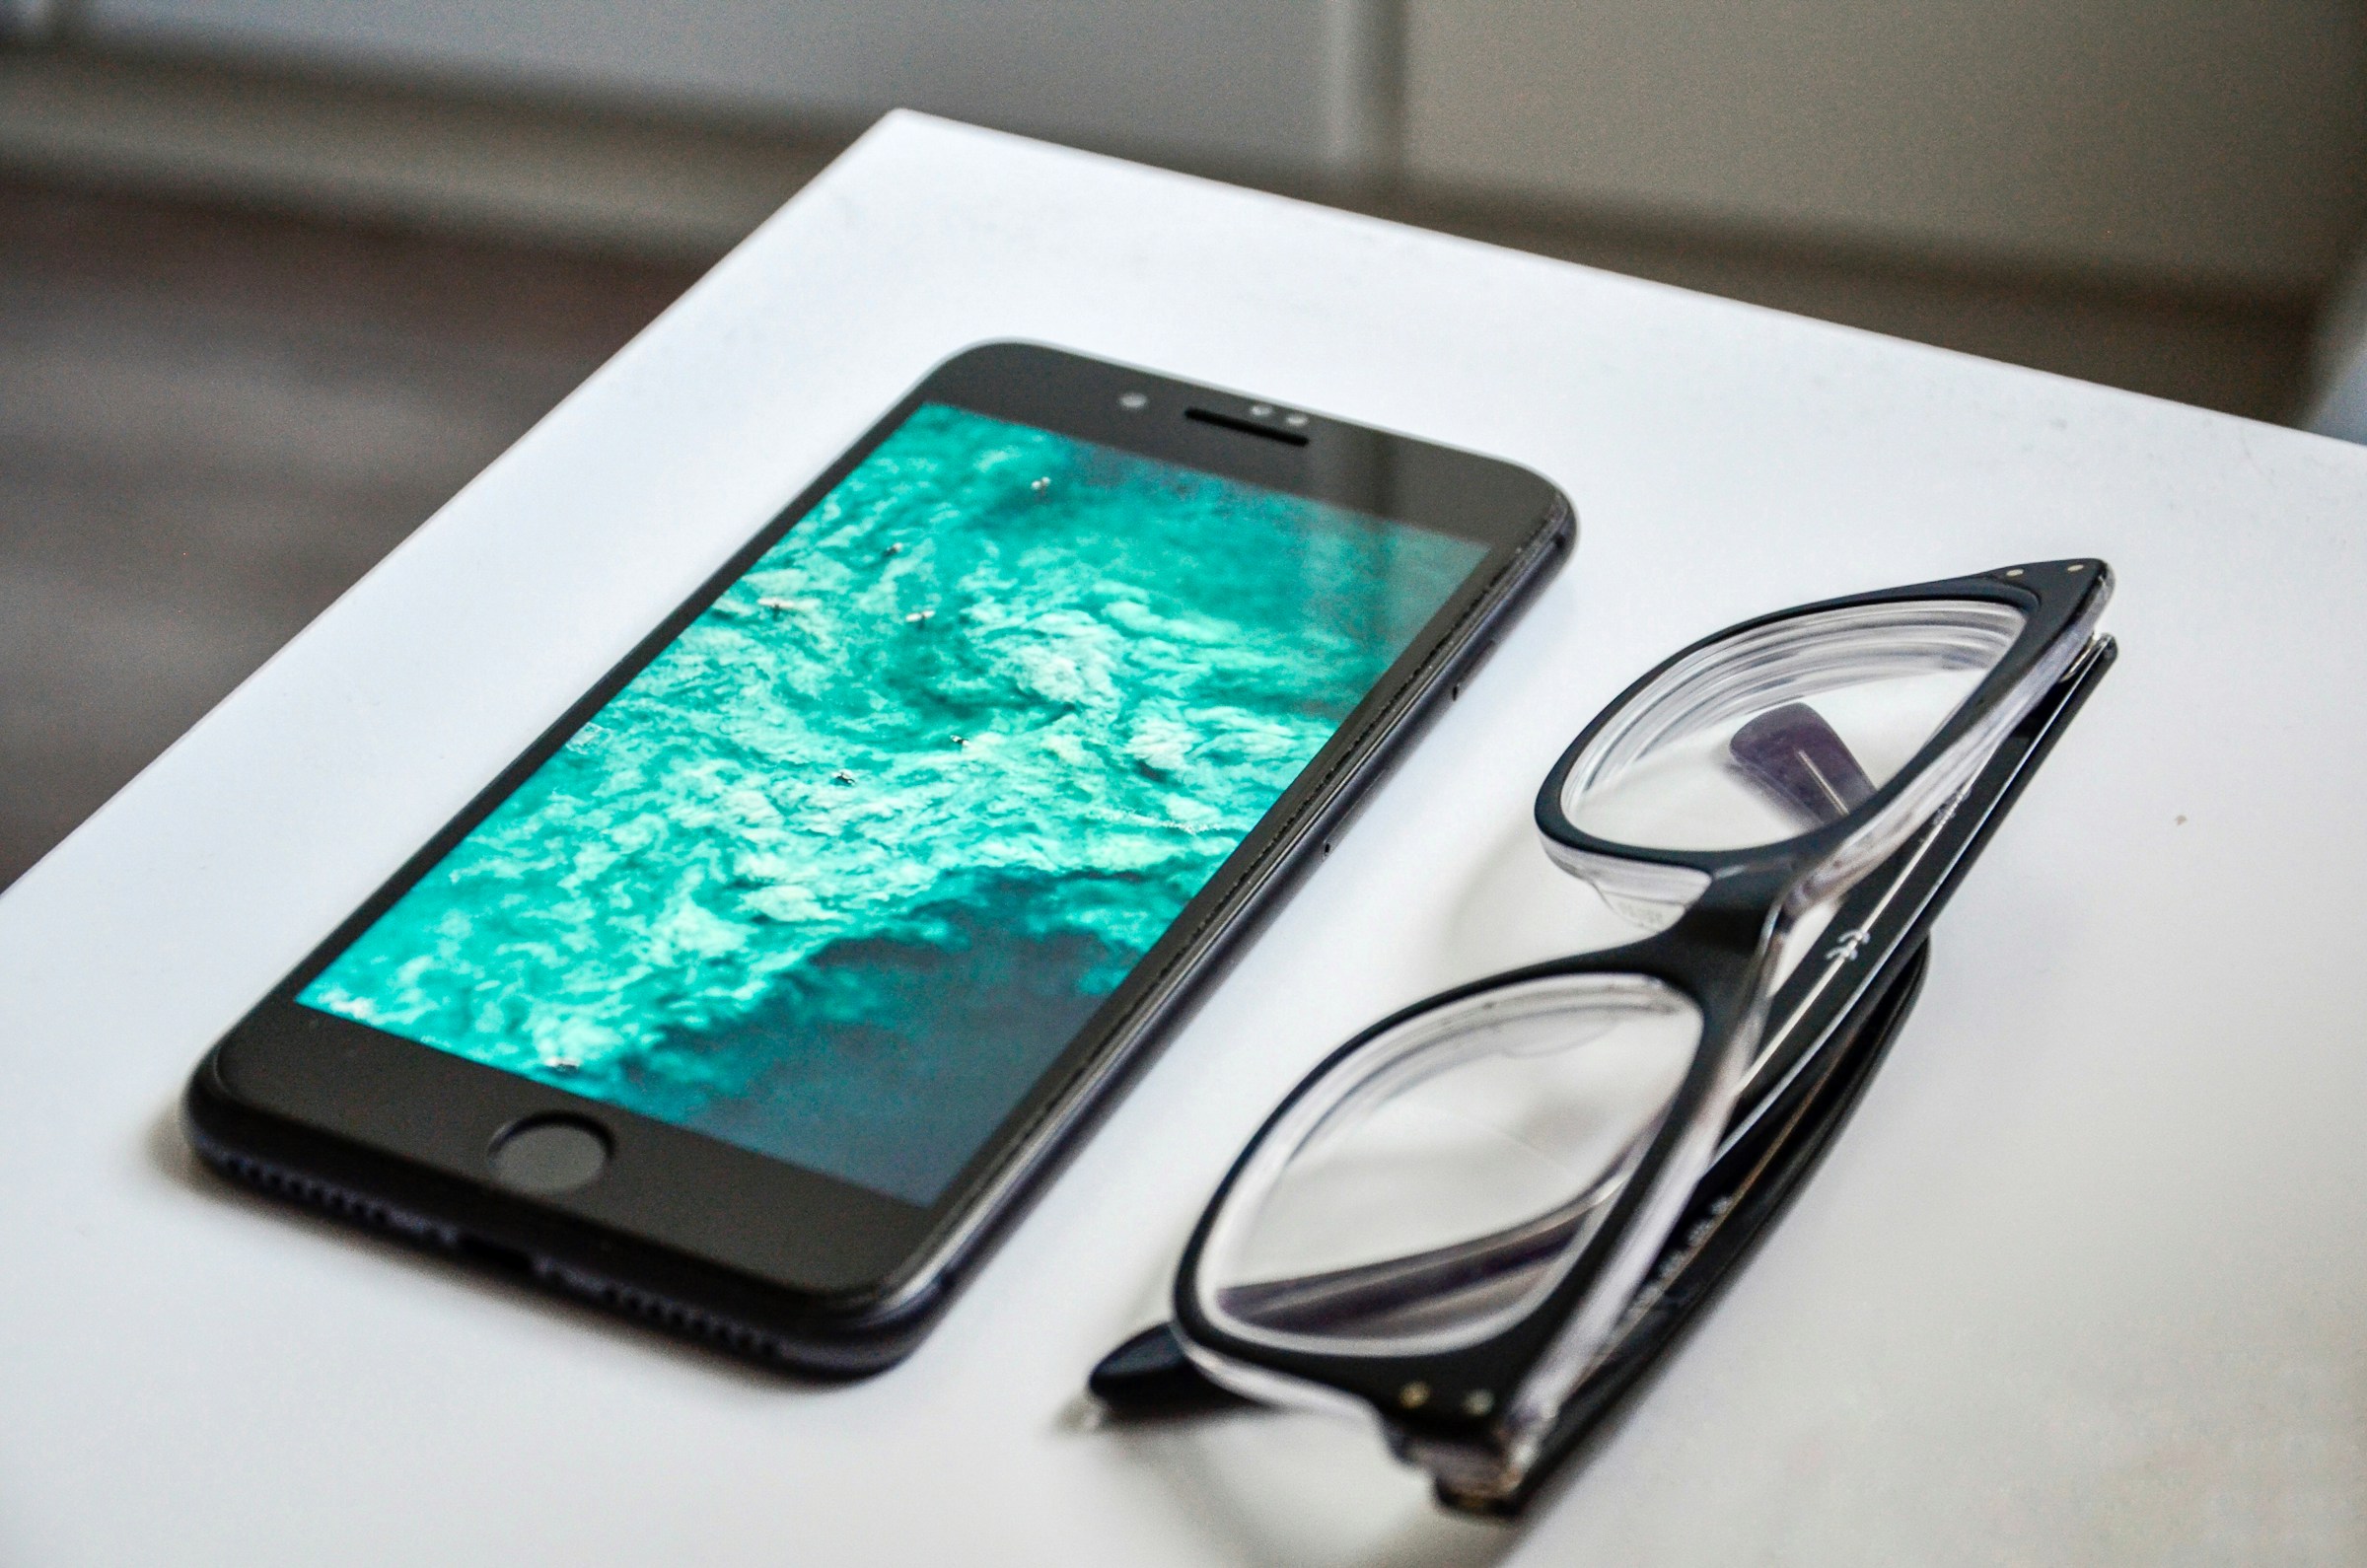 A smartphone and a pair of glasses lying on a table | Source: Unsplash